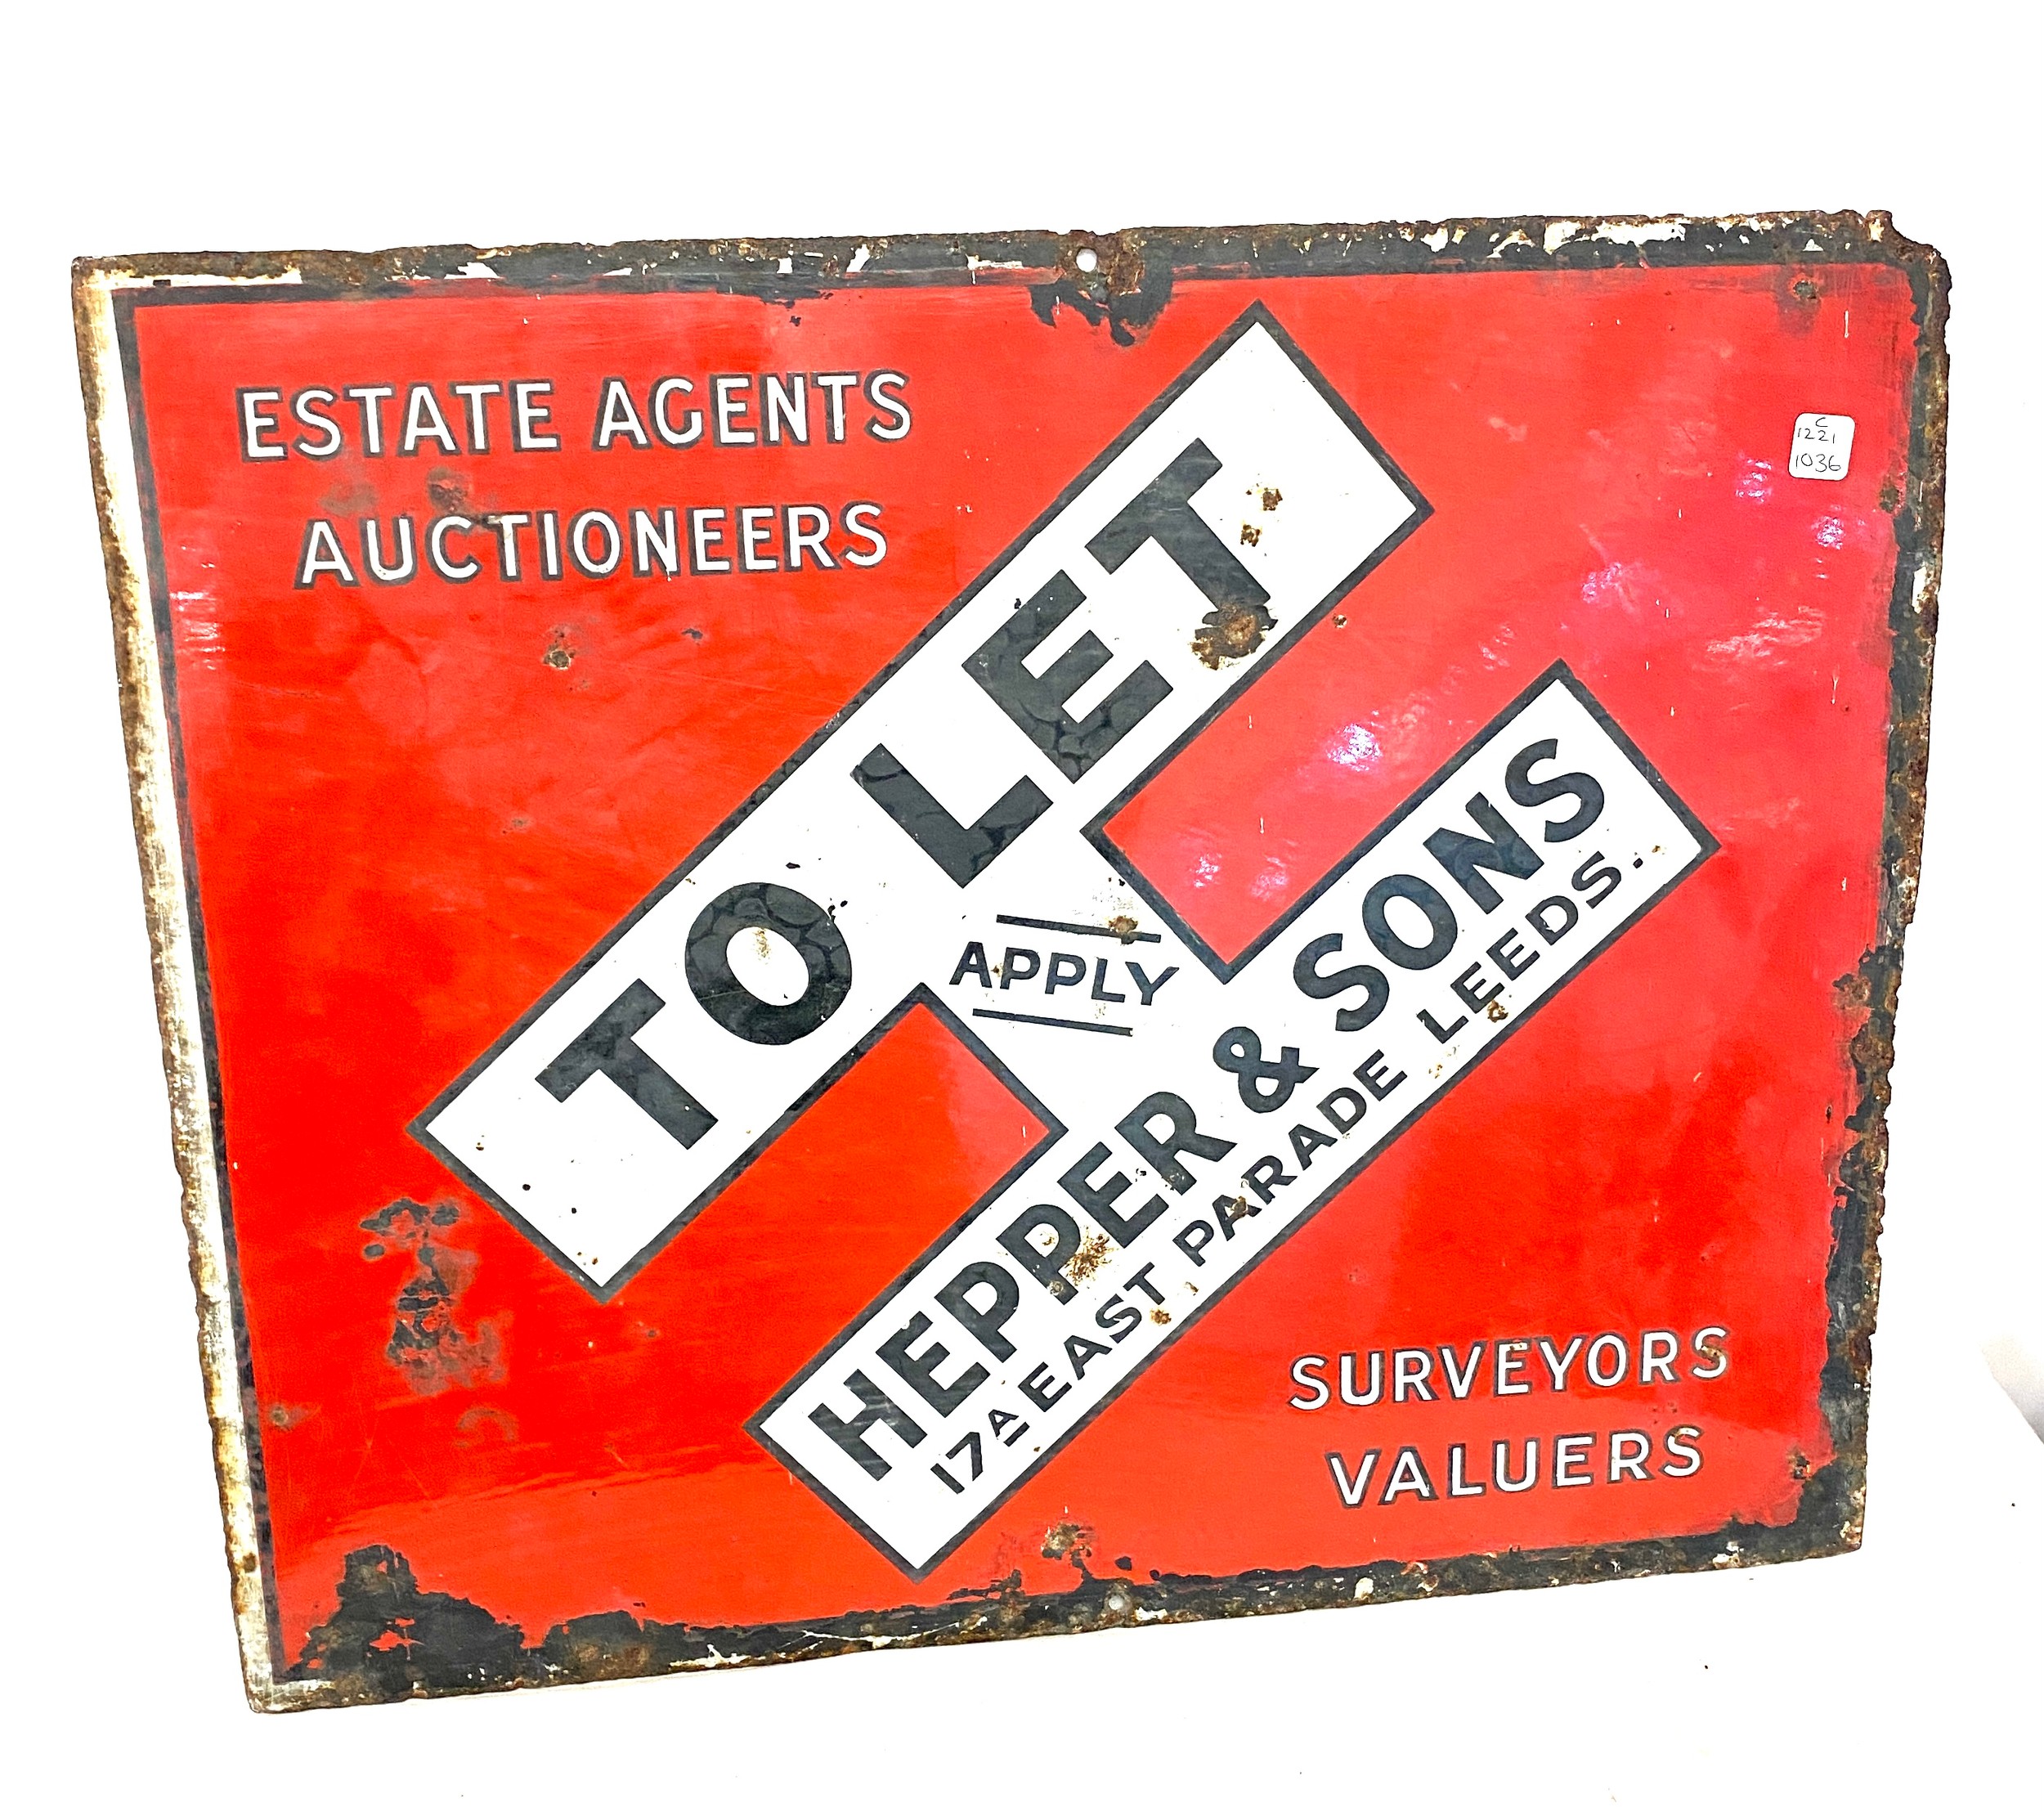 Vintage metal estate agent sign measures approx 22 inches by 18 inches